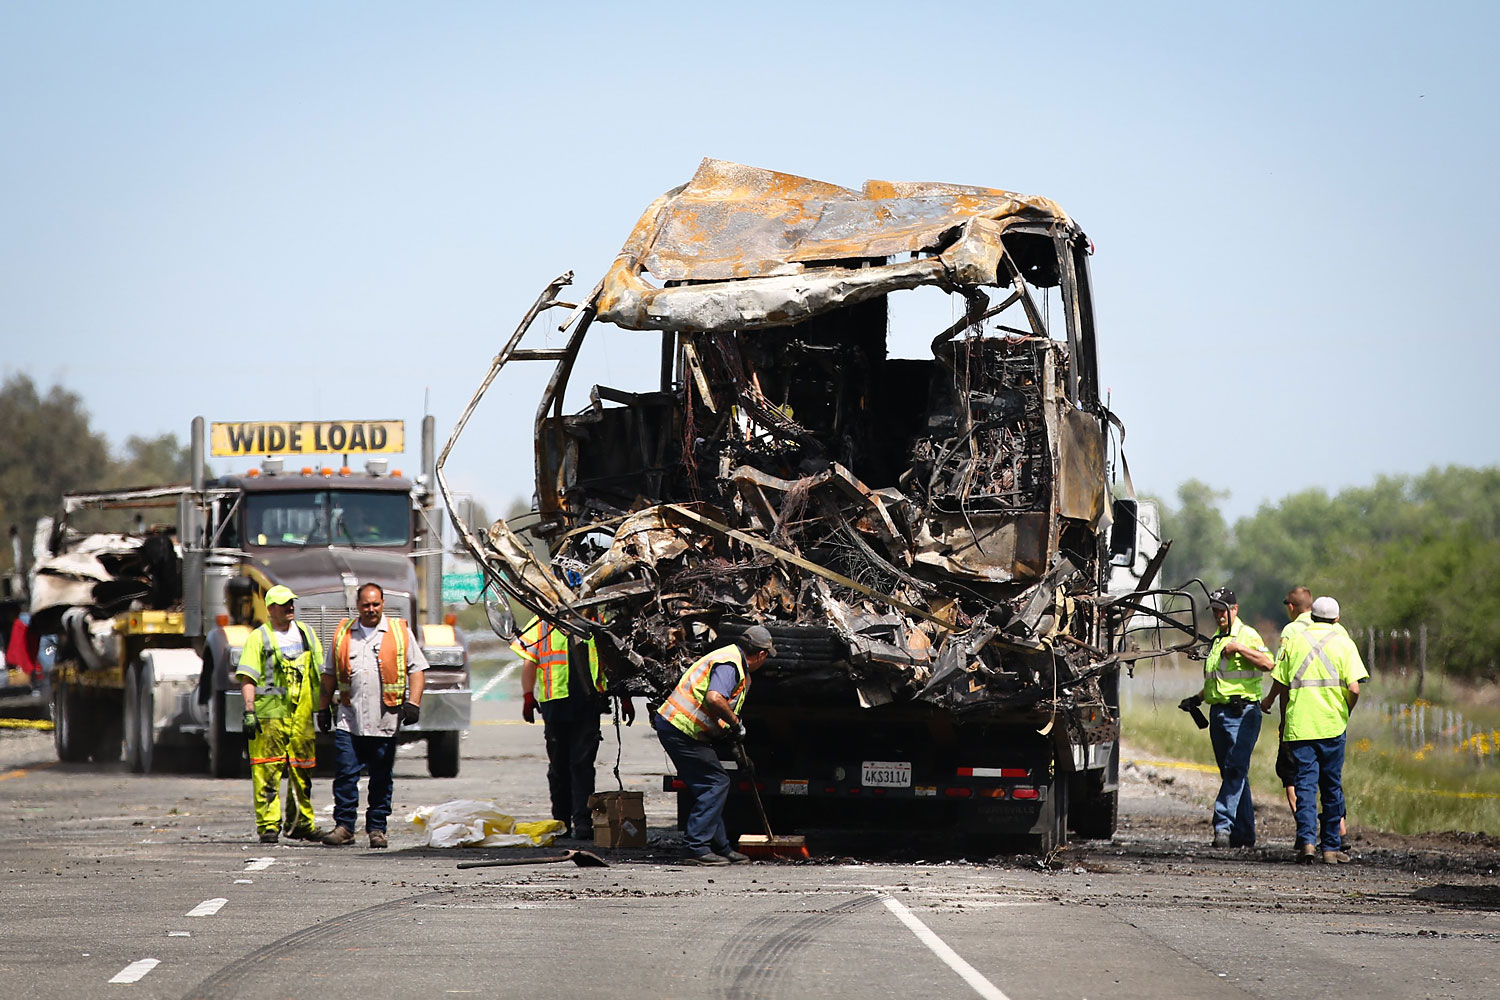 A bus involved in the deadly crash is loaded on to a truck at the scene on April 11, 2014  in Orland, California. (Elijah Nouvelage—Getty Images)